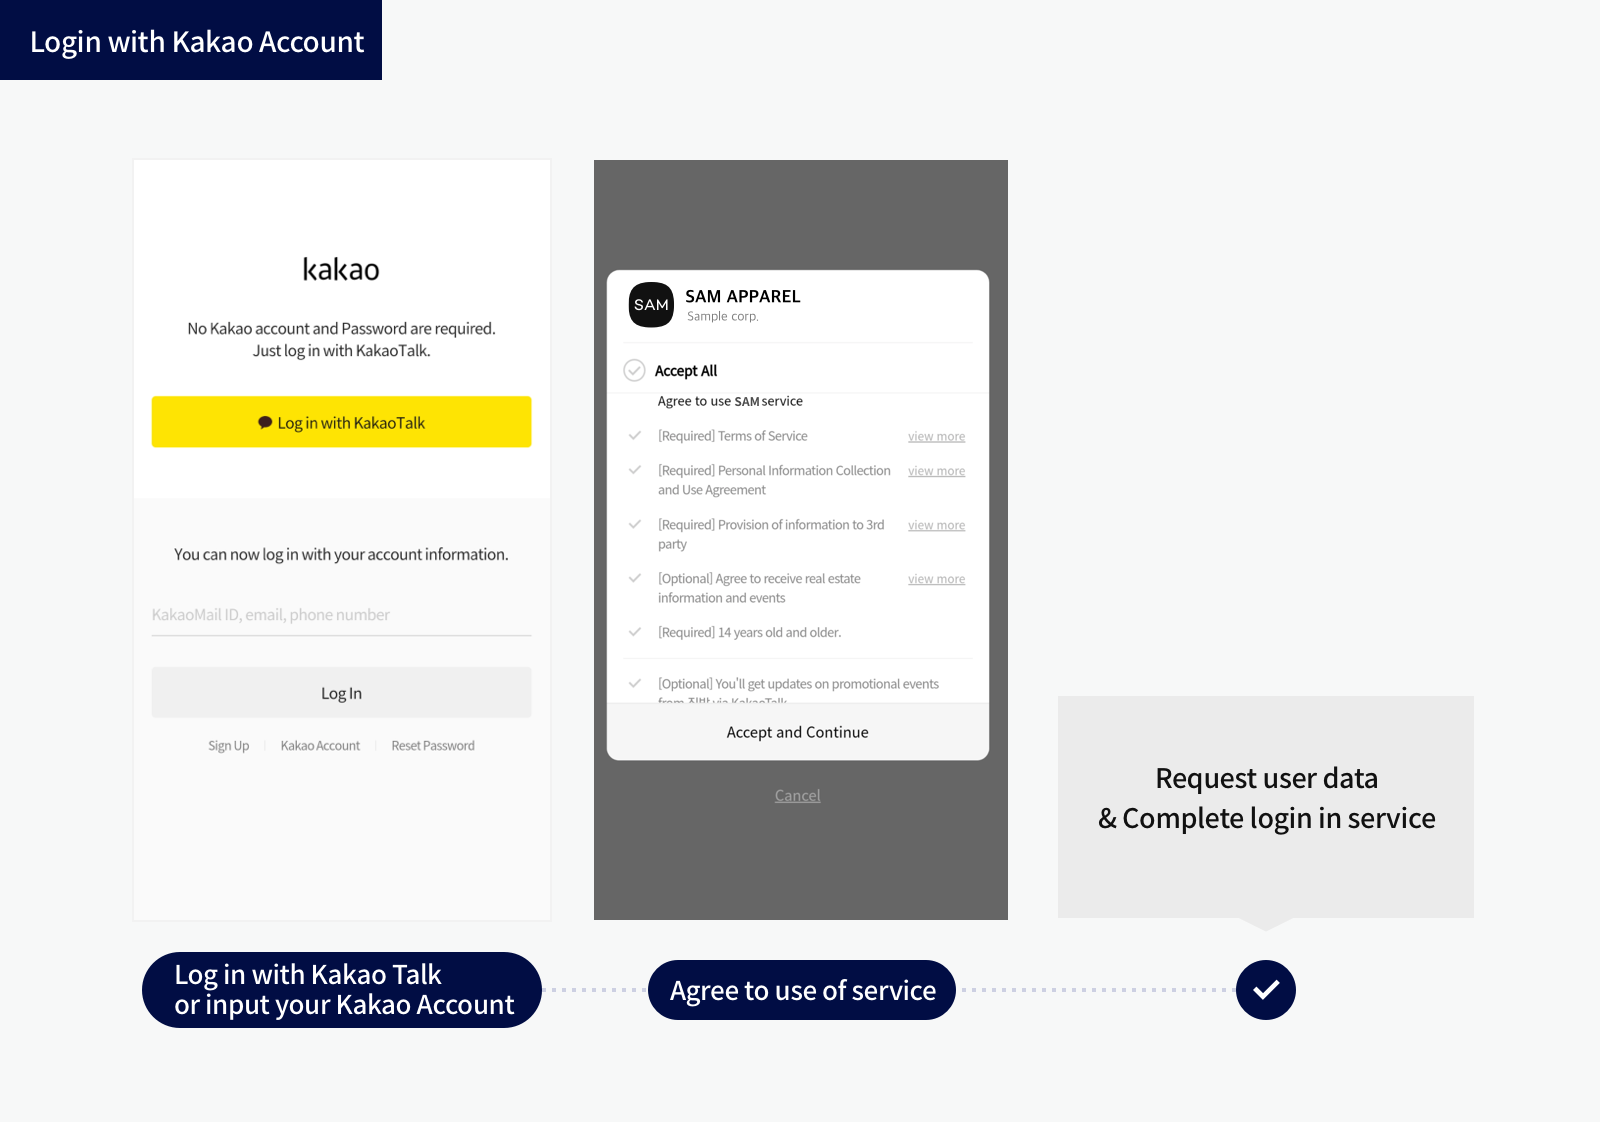 Process of Login with Kakao Account